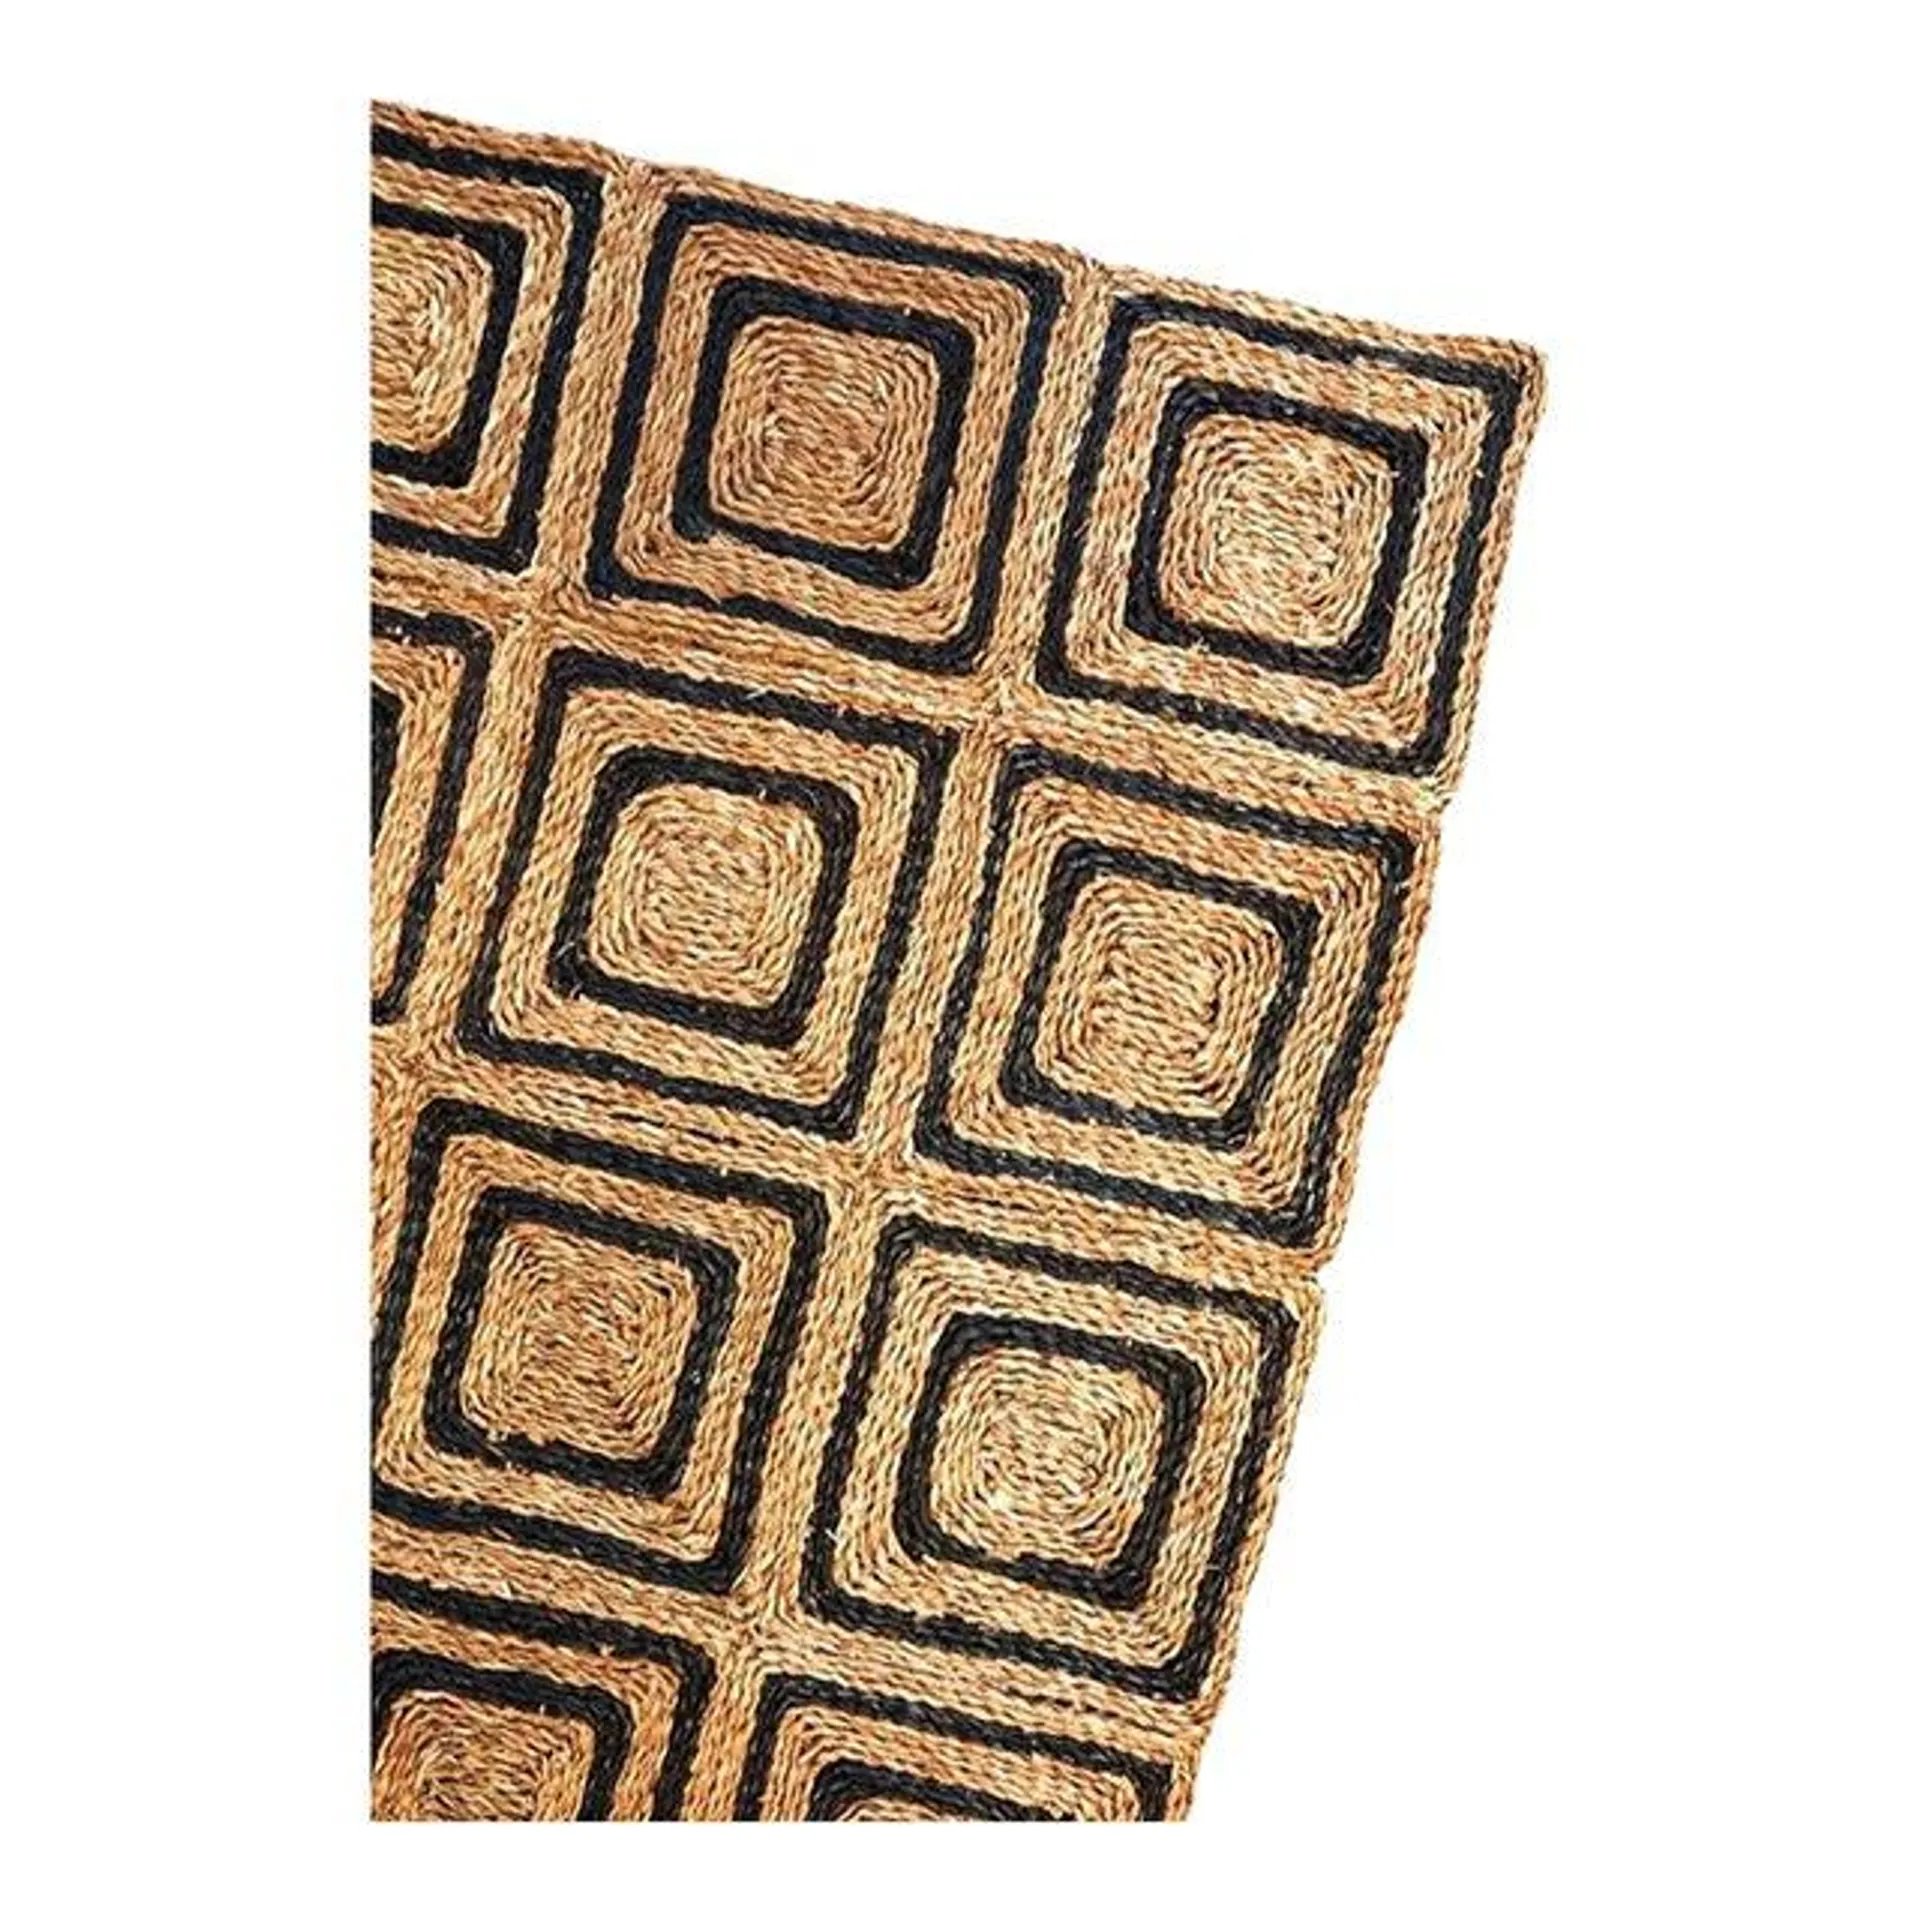 Rush House for Chairish Meridian Seagrass Rug - Natural/Black, 6' x 9'